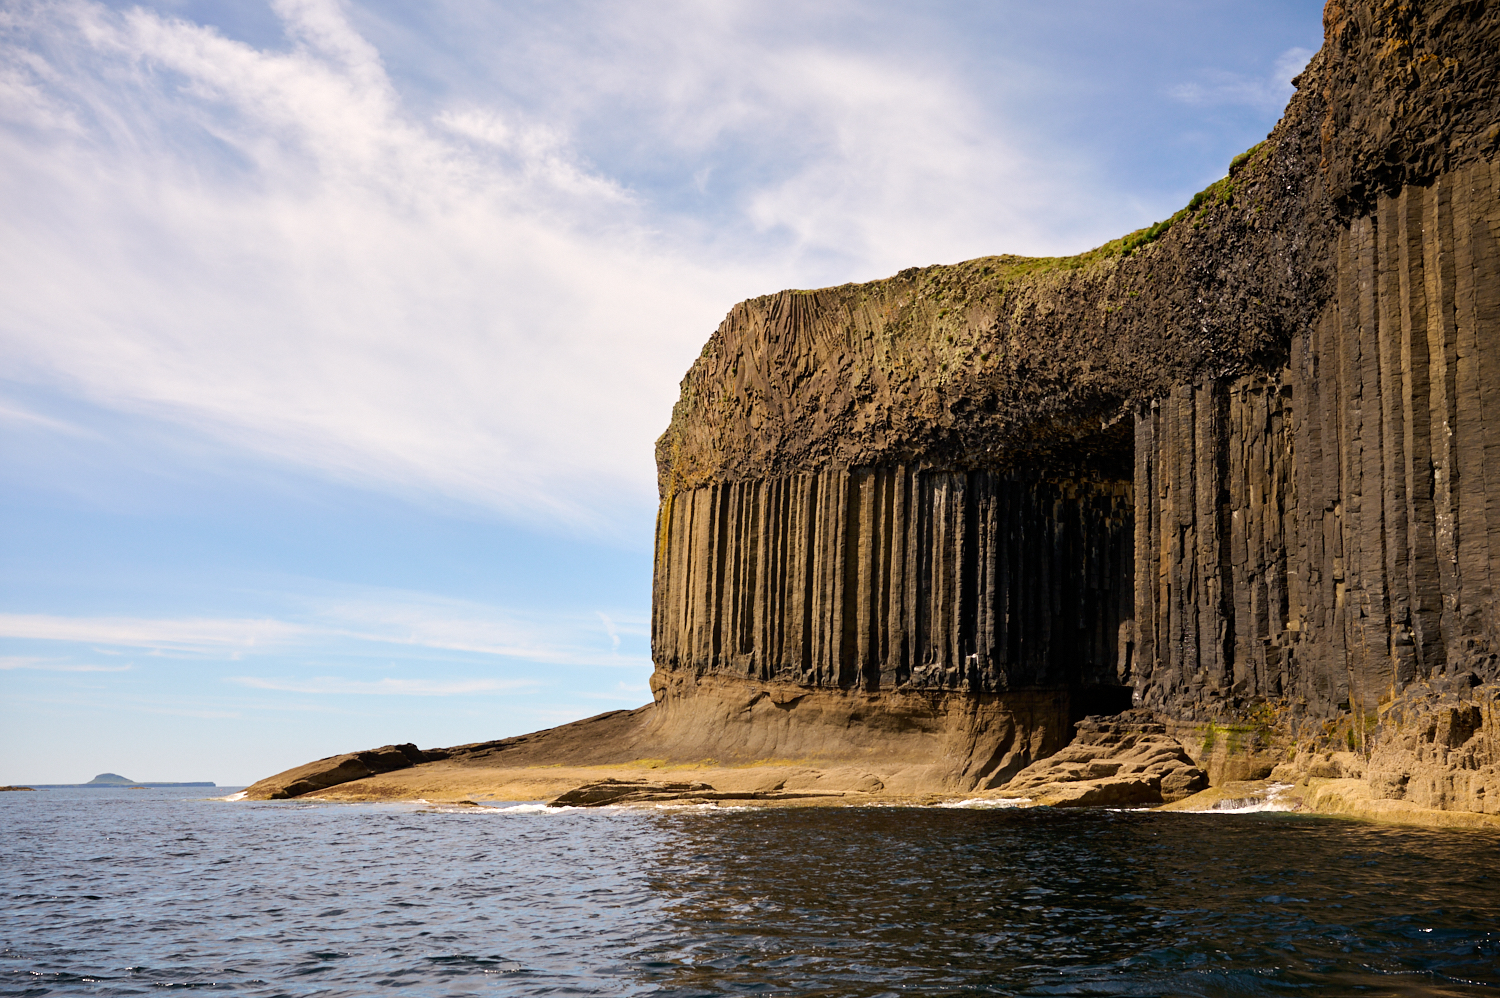 A daytrip to the puffins at the Isle of Staffa, Inner Hebrides.